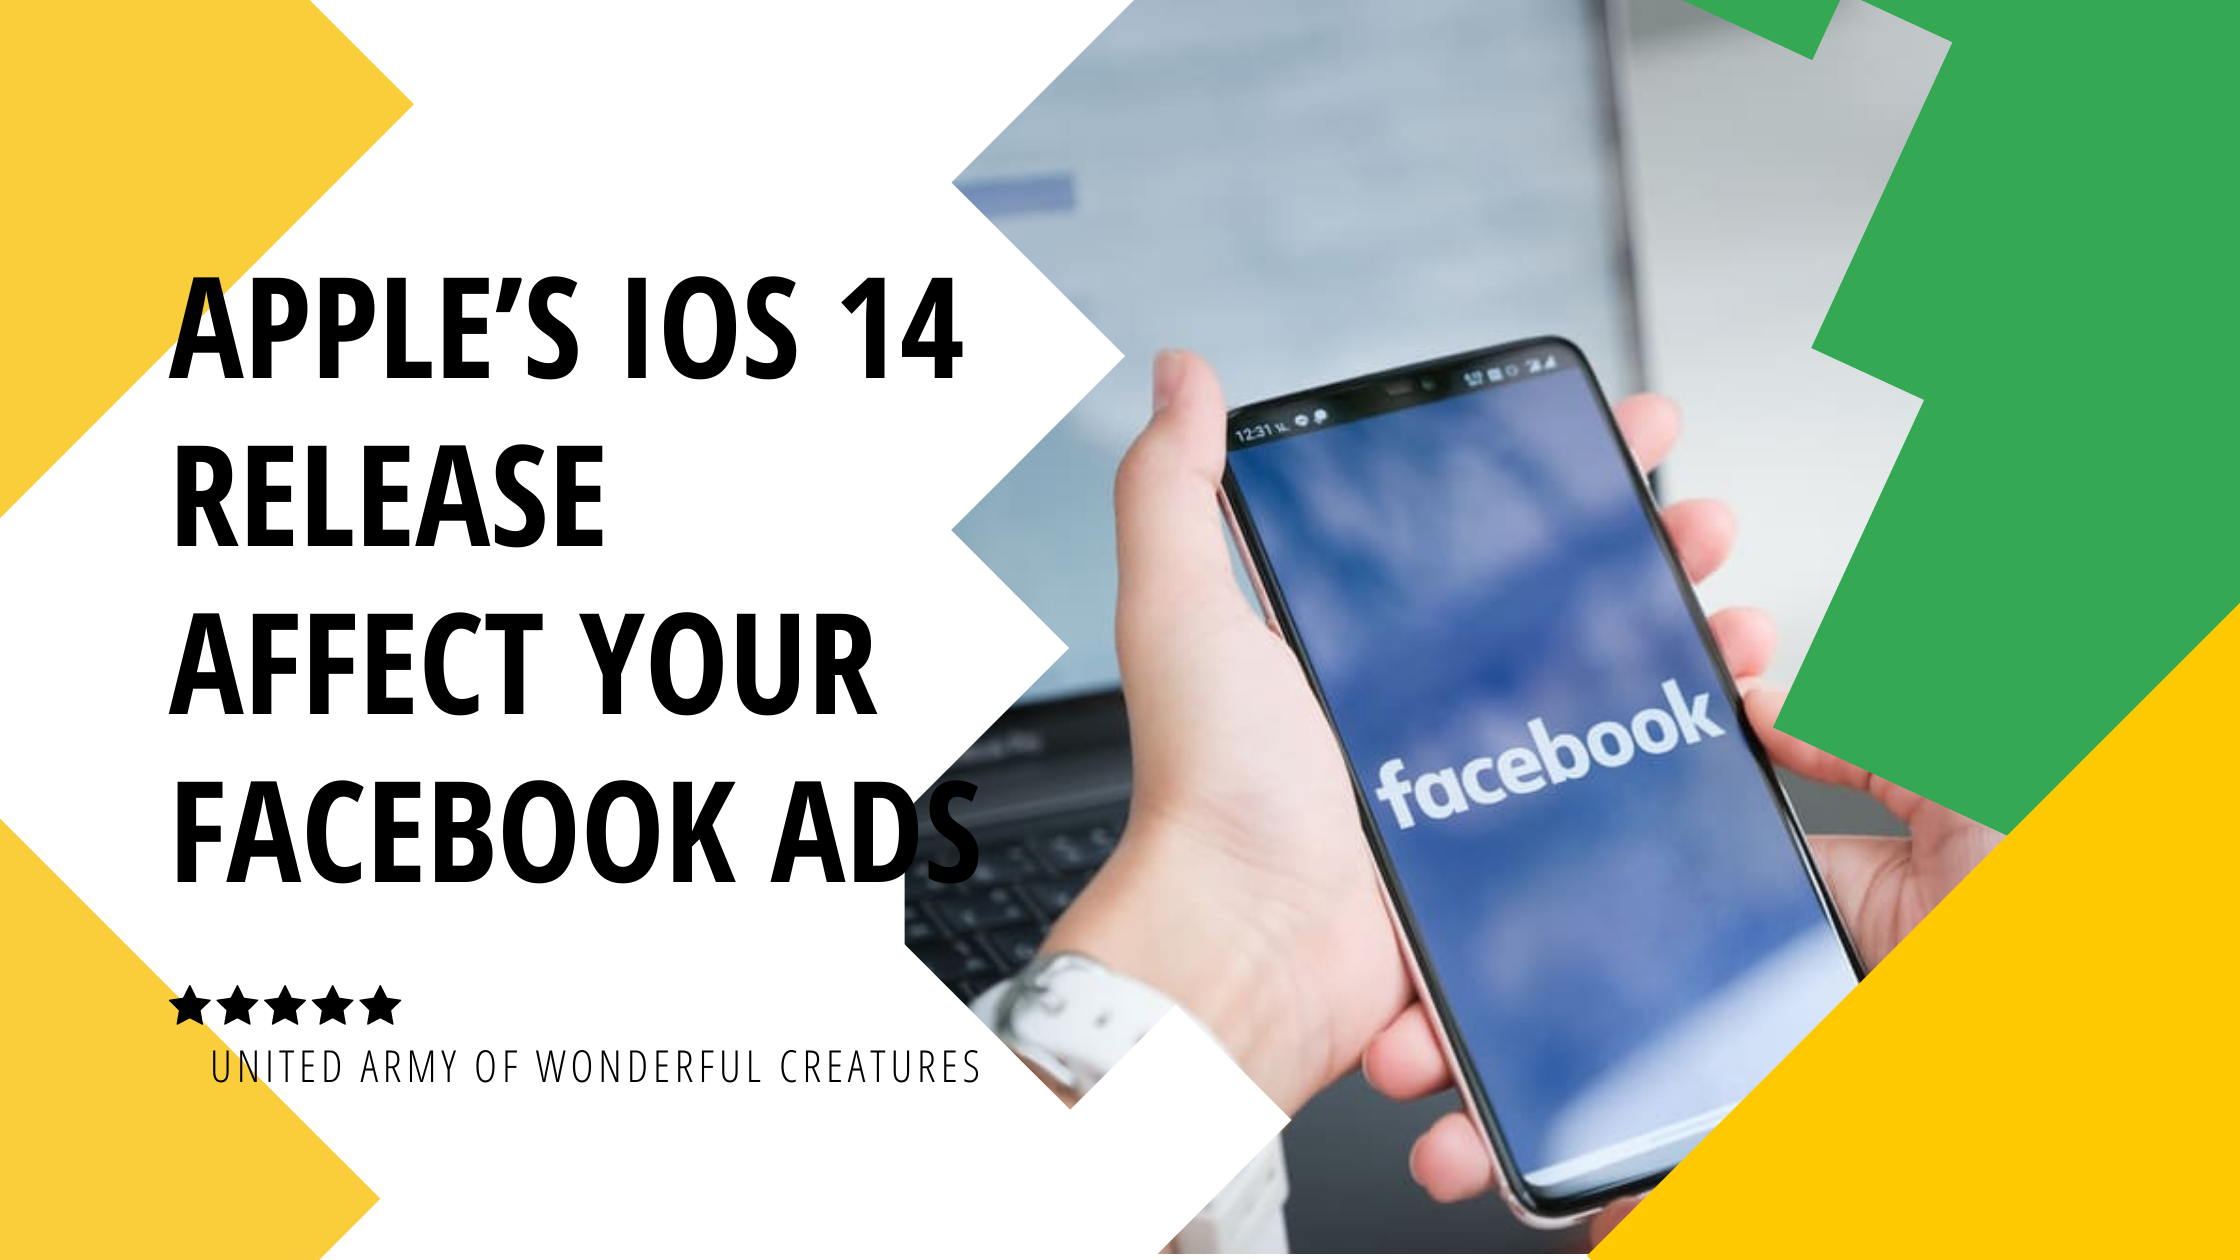 How Apple’s iOS 14 Release May Affect Your Facebook Ads